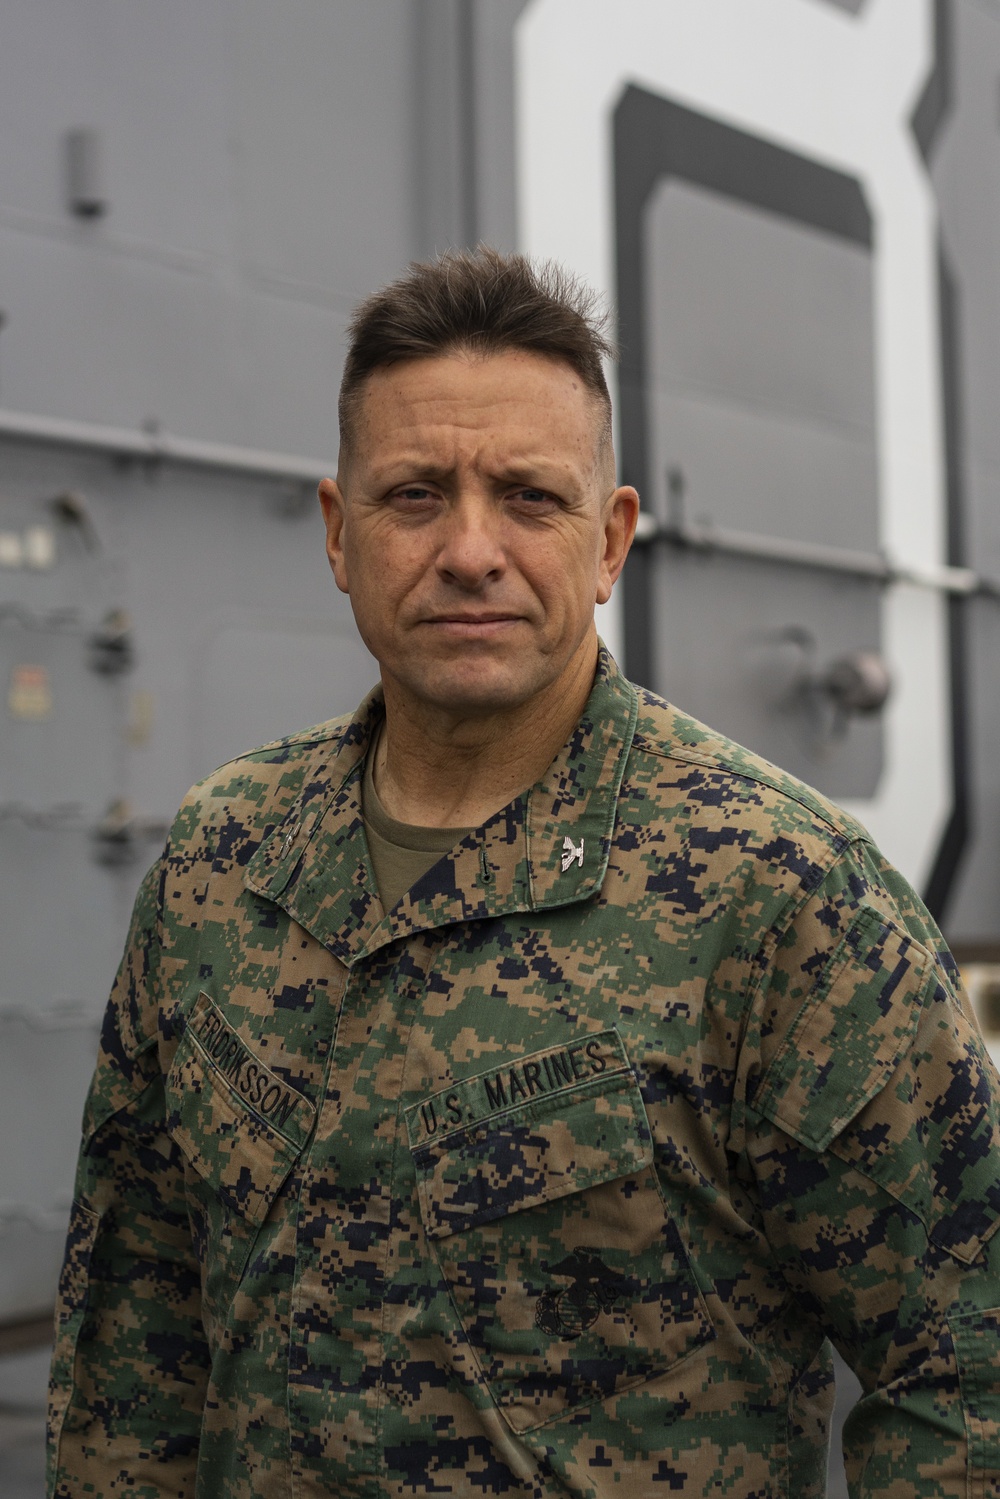 The 15th Marine Expeditionary Unit Commanding Officer Poses for a Picture